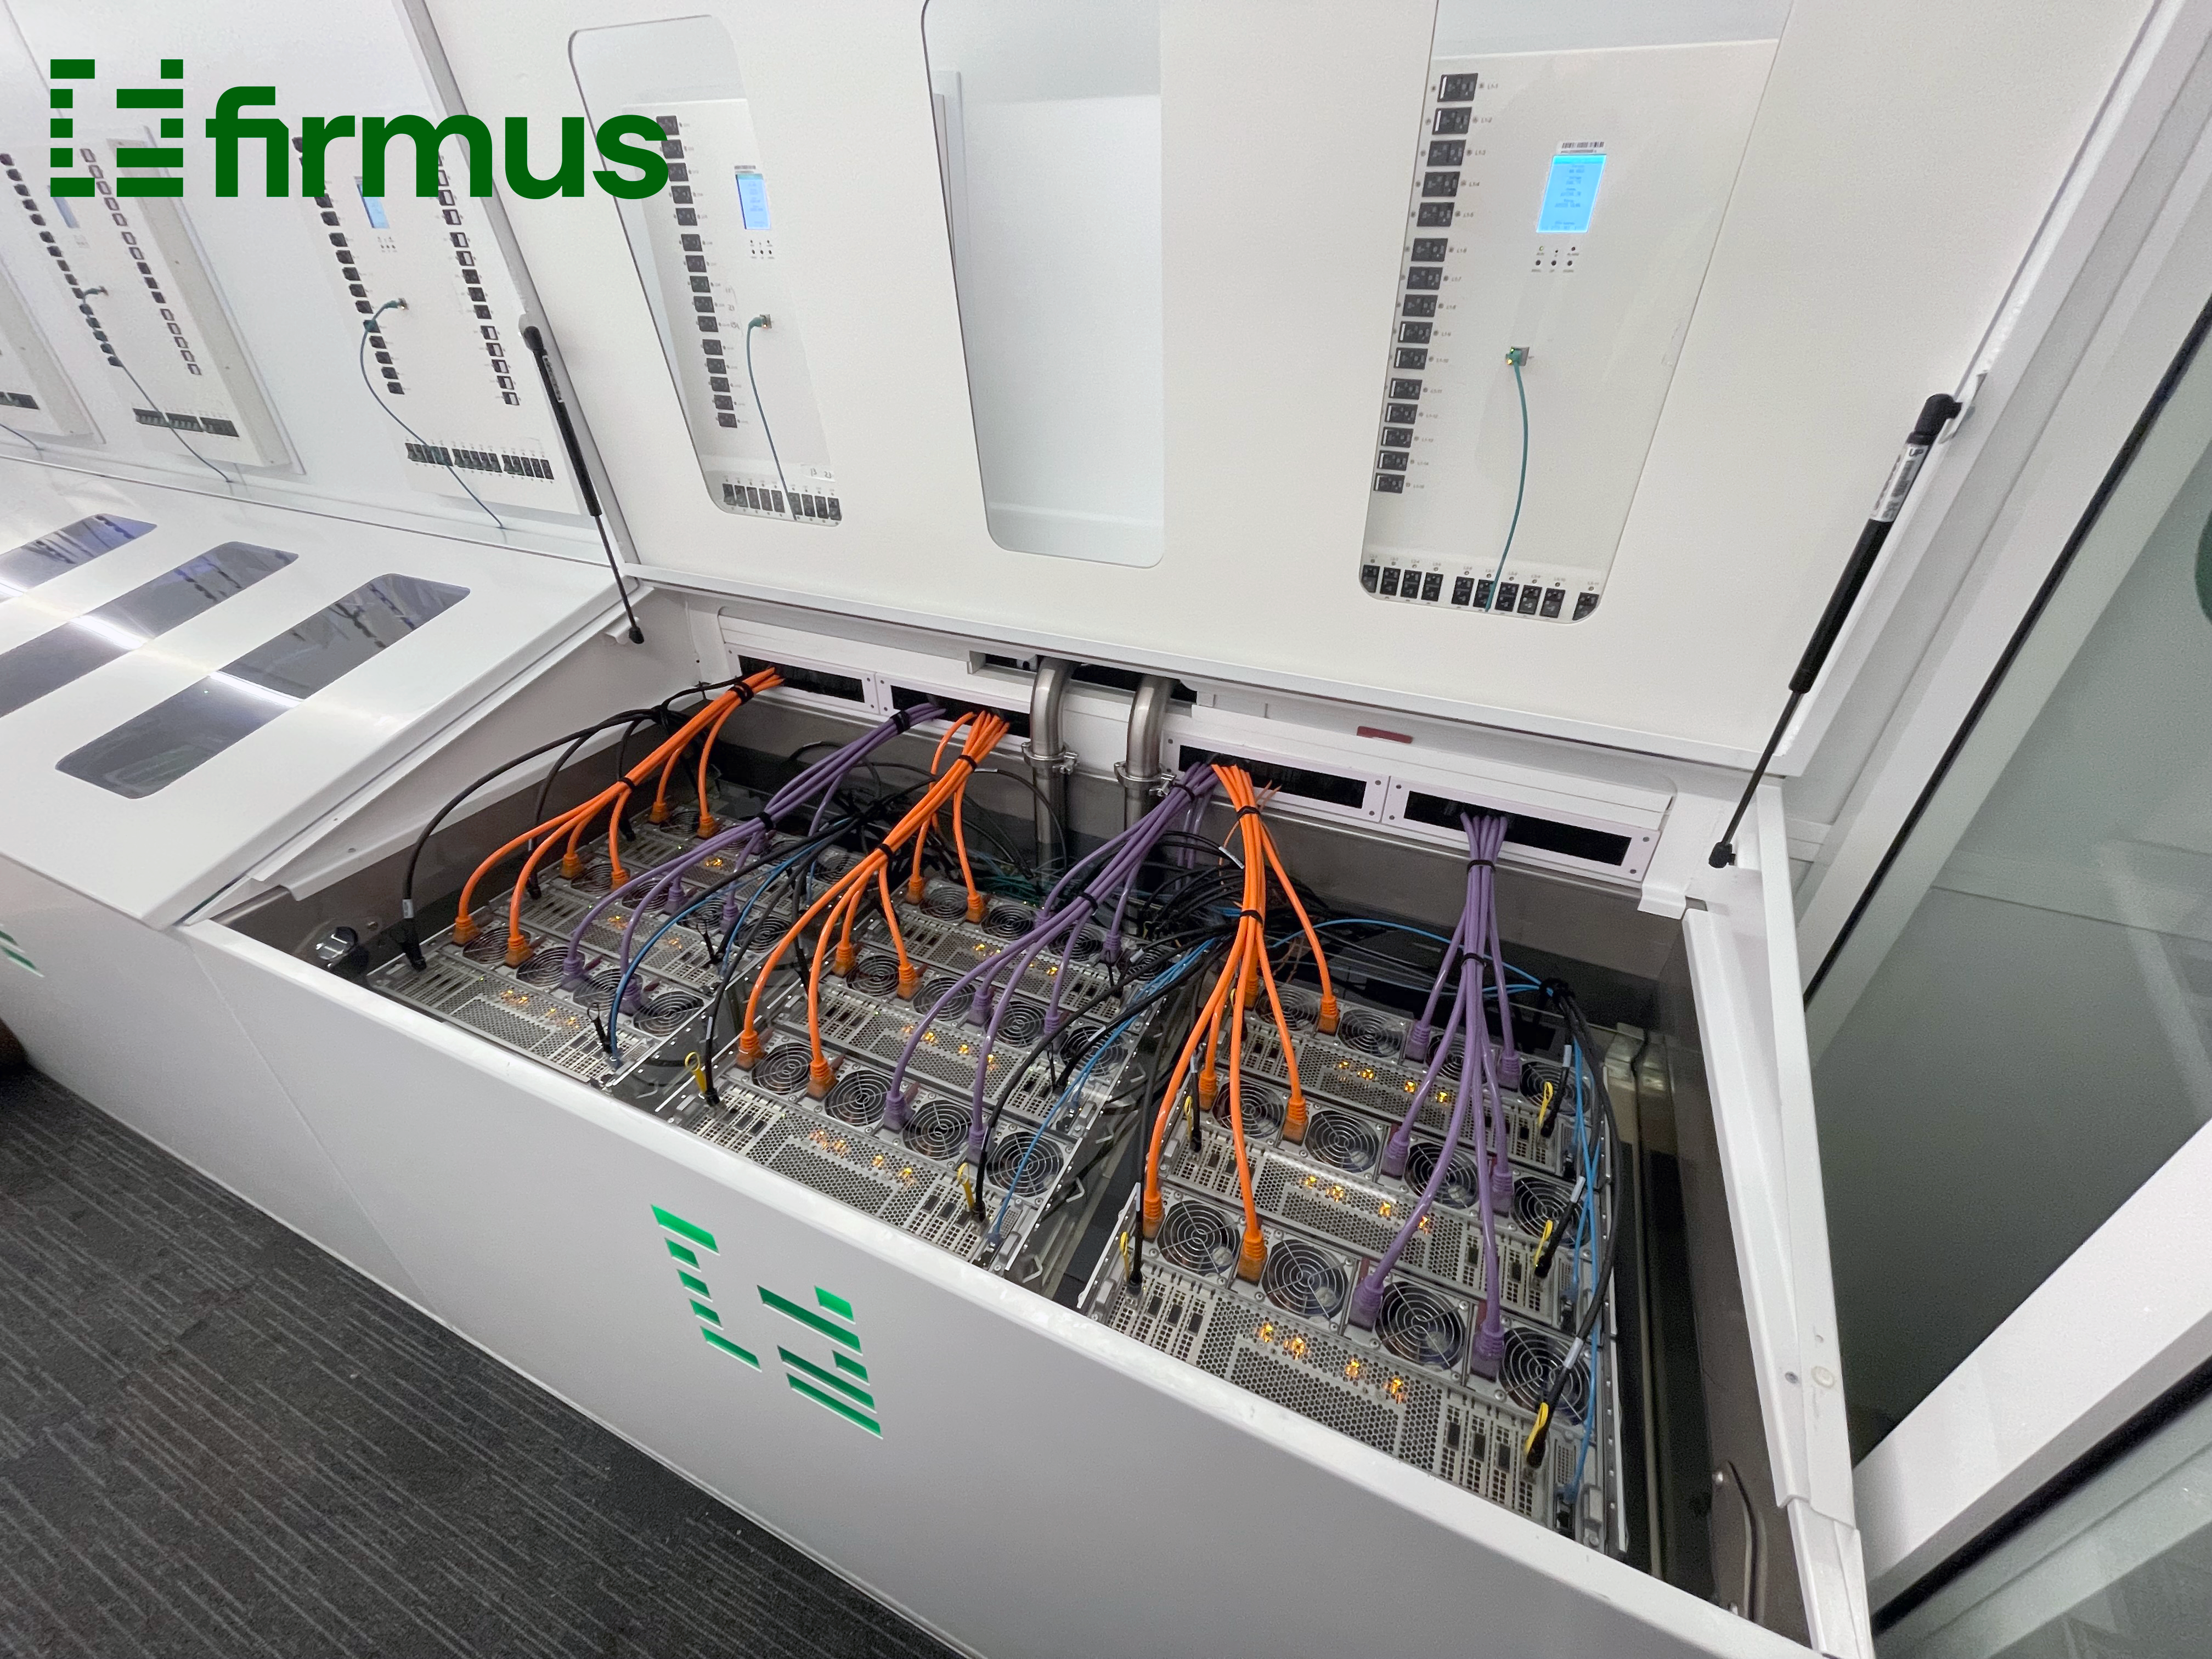 Within the HyperCube is a fleet of high-performance servers in an immersion-cooled environment. The combination of Firmus immersion-cooled computing platform paired with STT GDCs highly efficient data centre infrastructure will result in AI workloads running with a lower PUE, lower CO2 emissions and higher petaflops per watt.